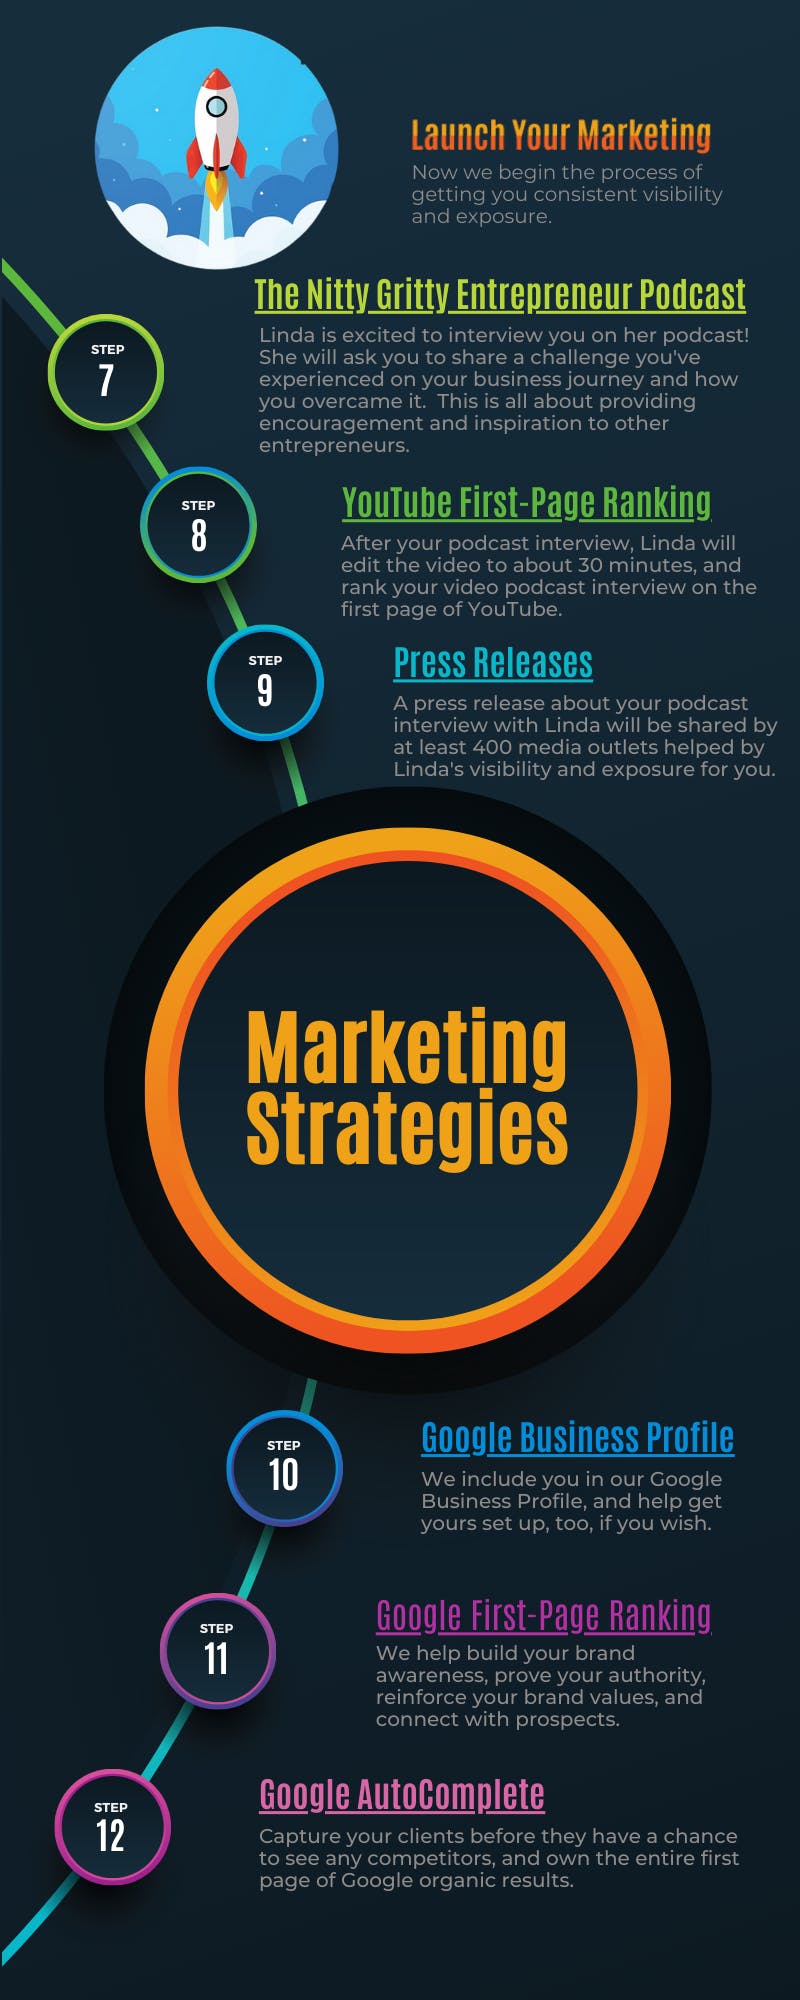 The Video Business Directory Marketing Strategies